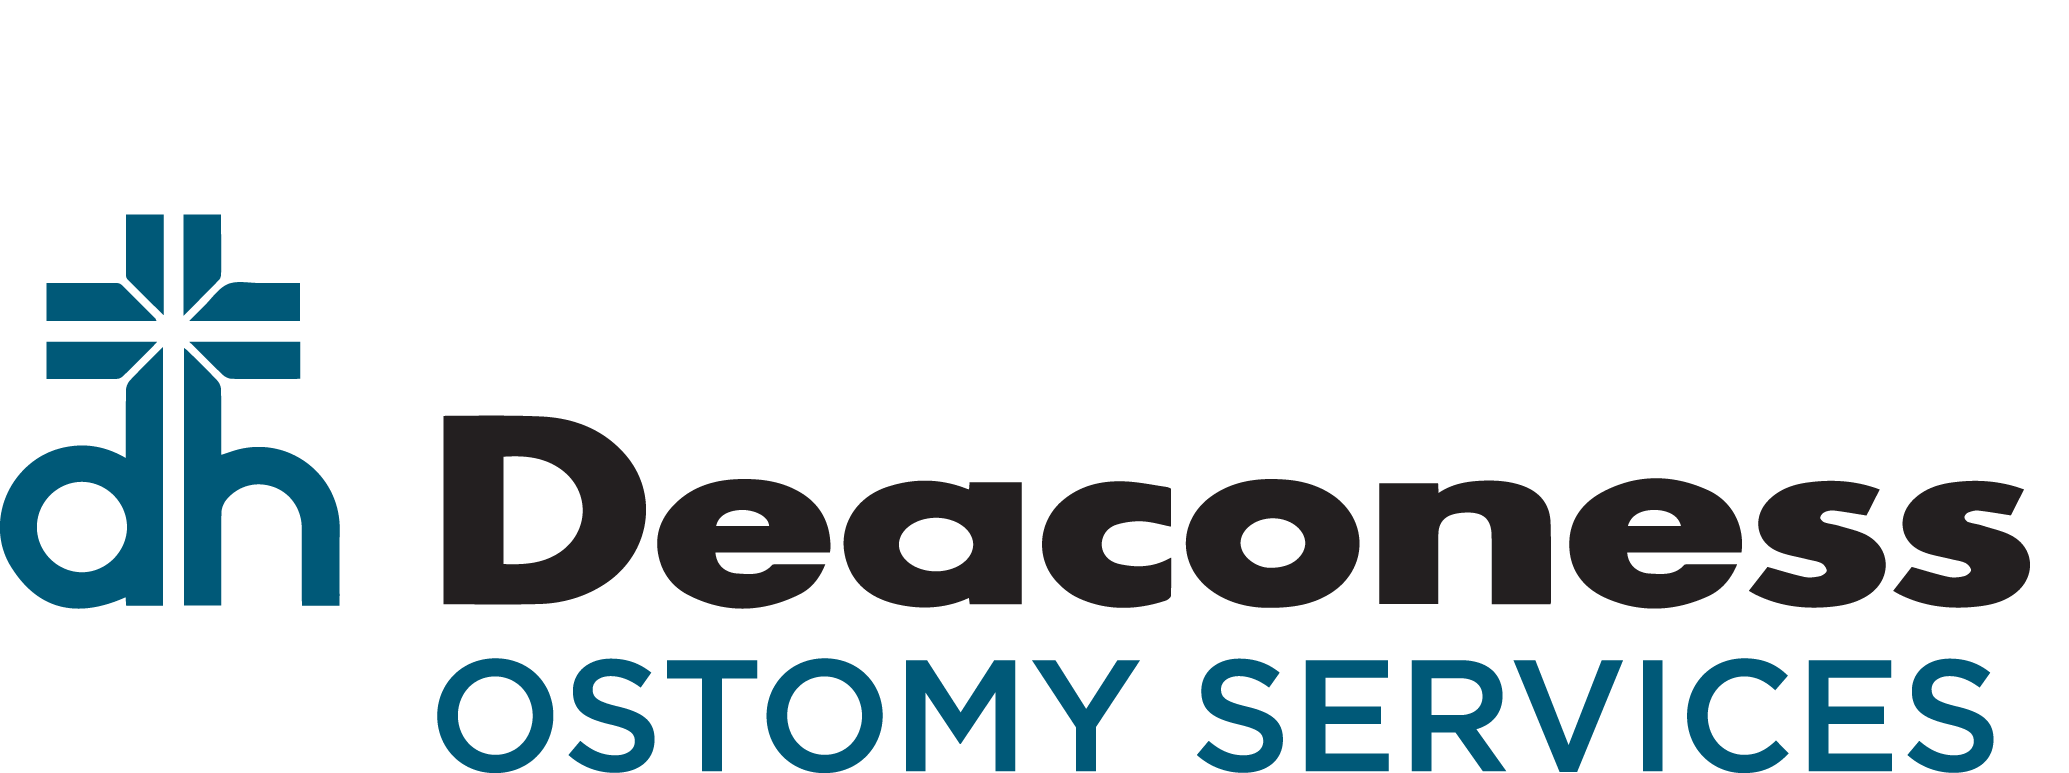 Deaconess Ostomy Services